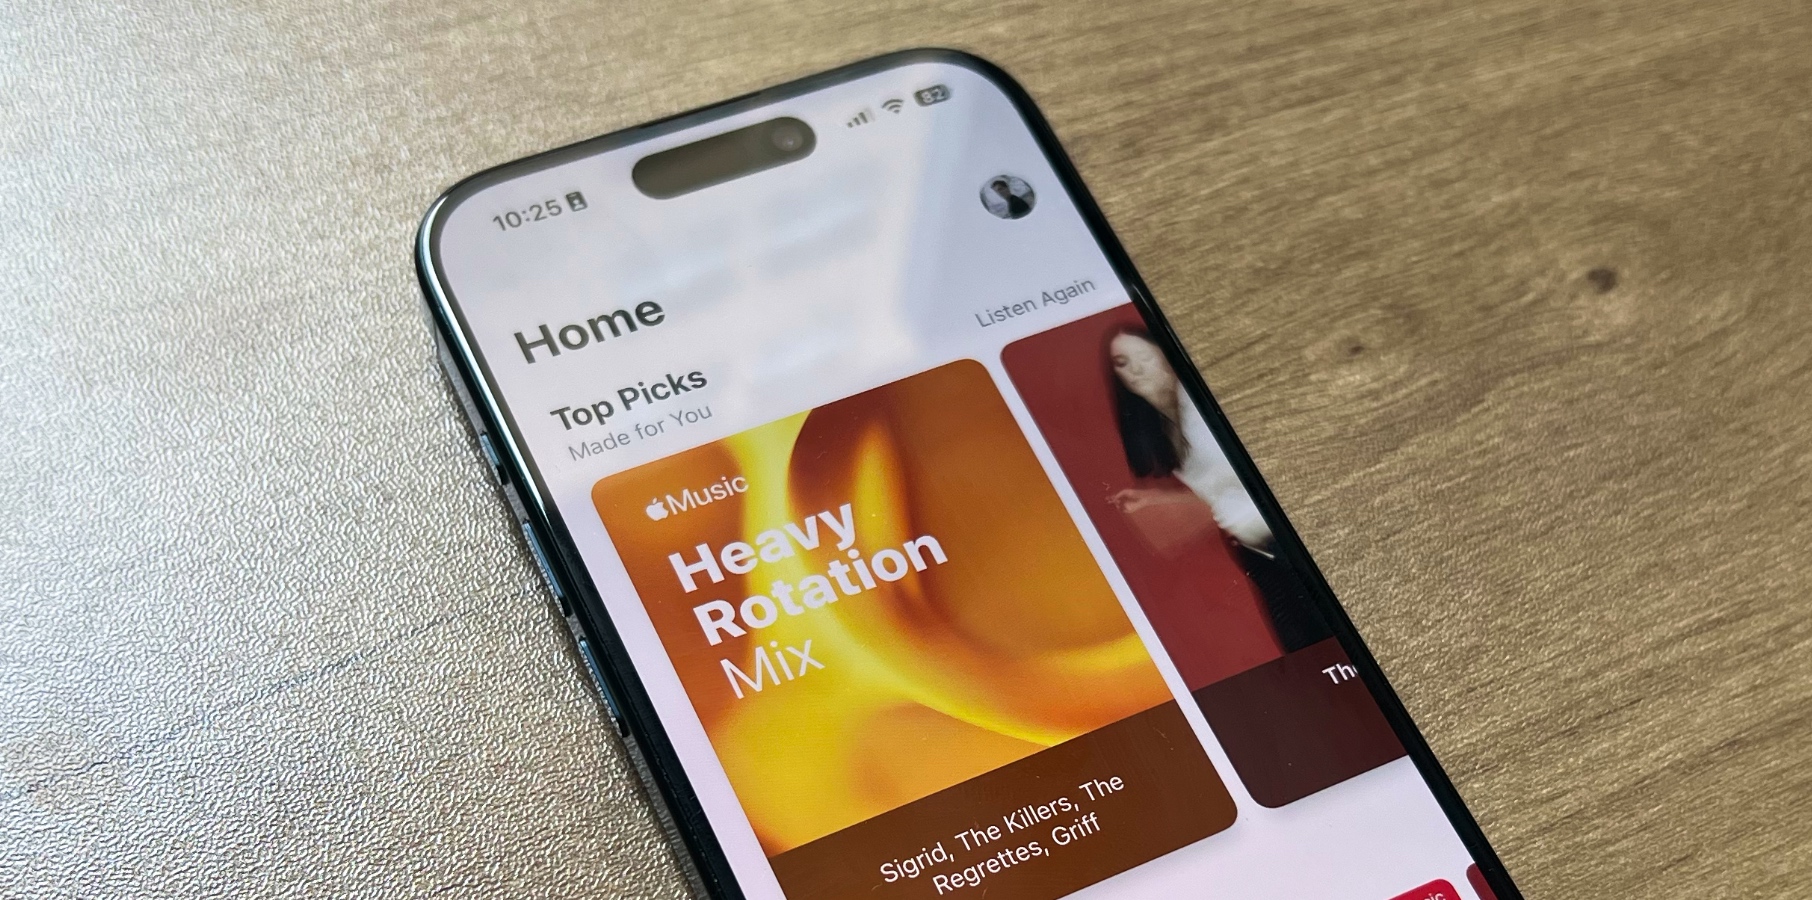 Heavy Rotation Mix playlist, newest Apple Music feature